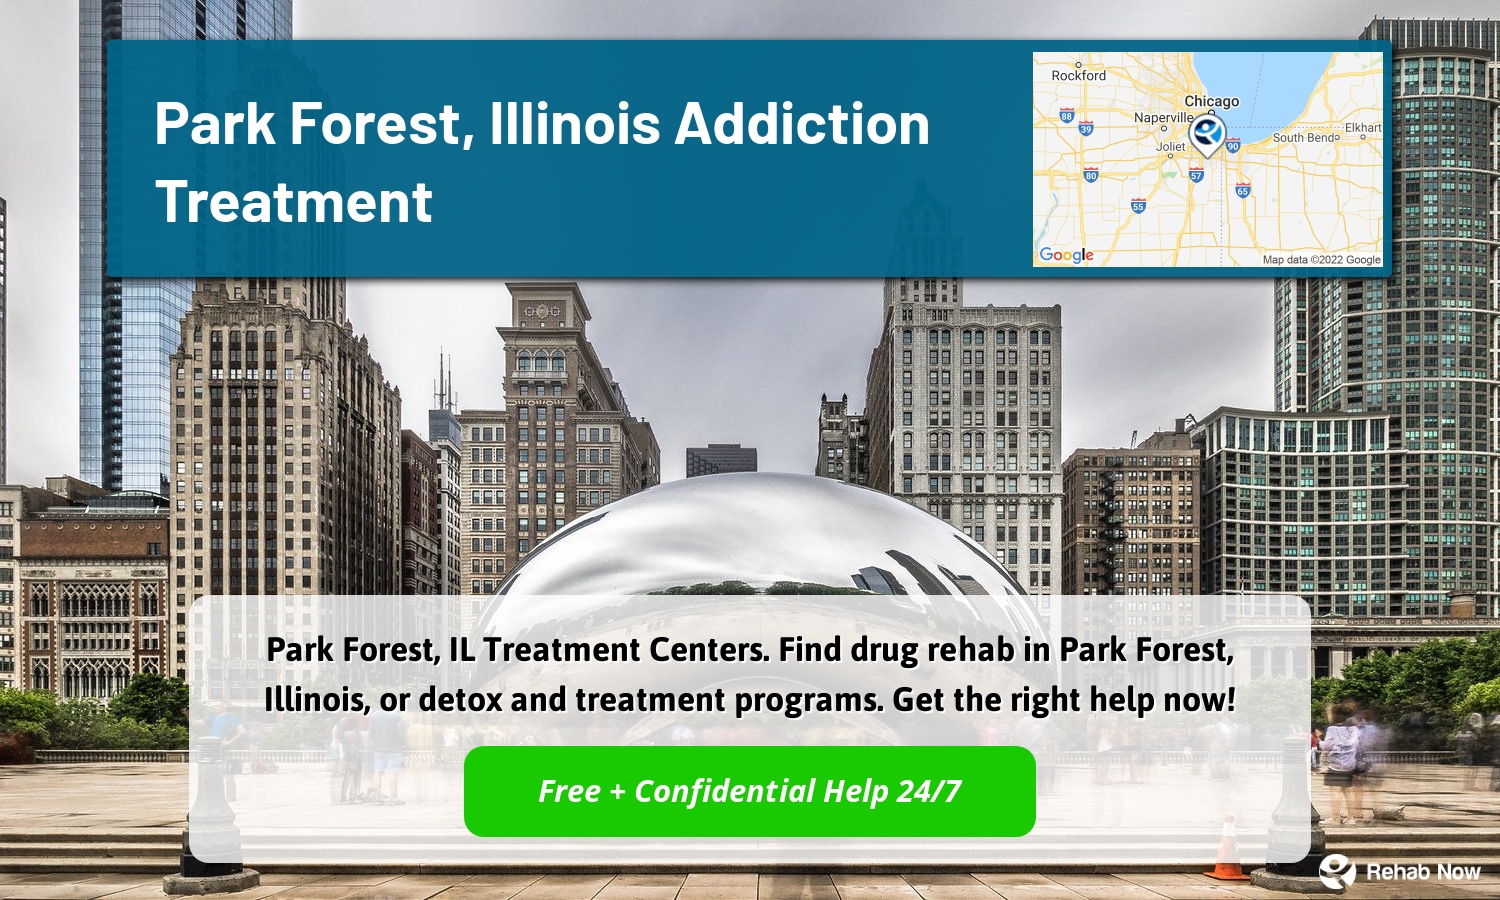 Park Forest, IL Treatment Centers. Find drug rehab in Park Forest, Illinois, or detox and treatment programs. Get the right help now!